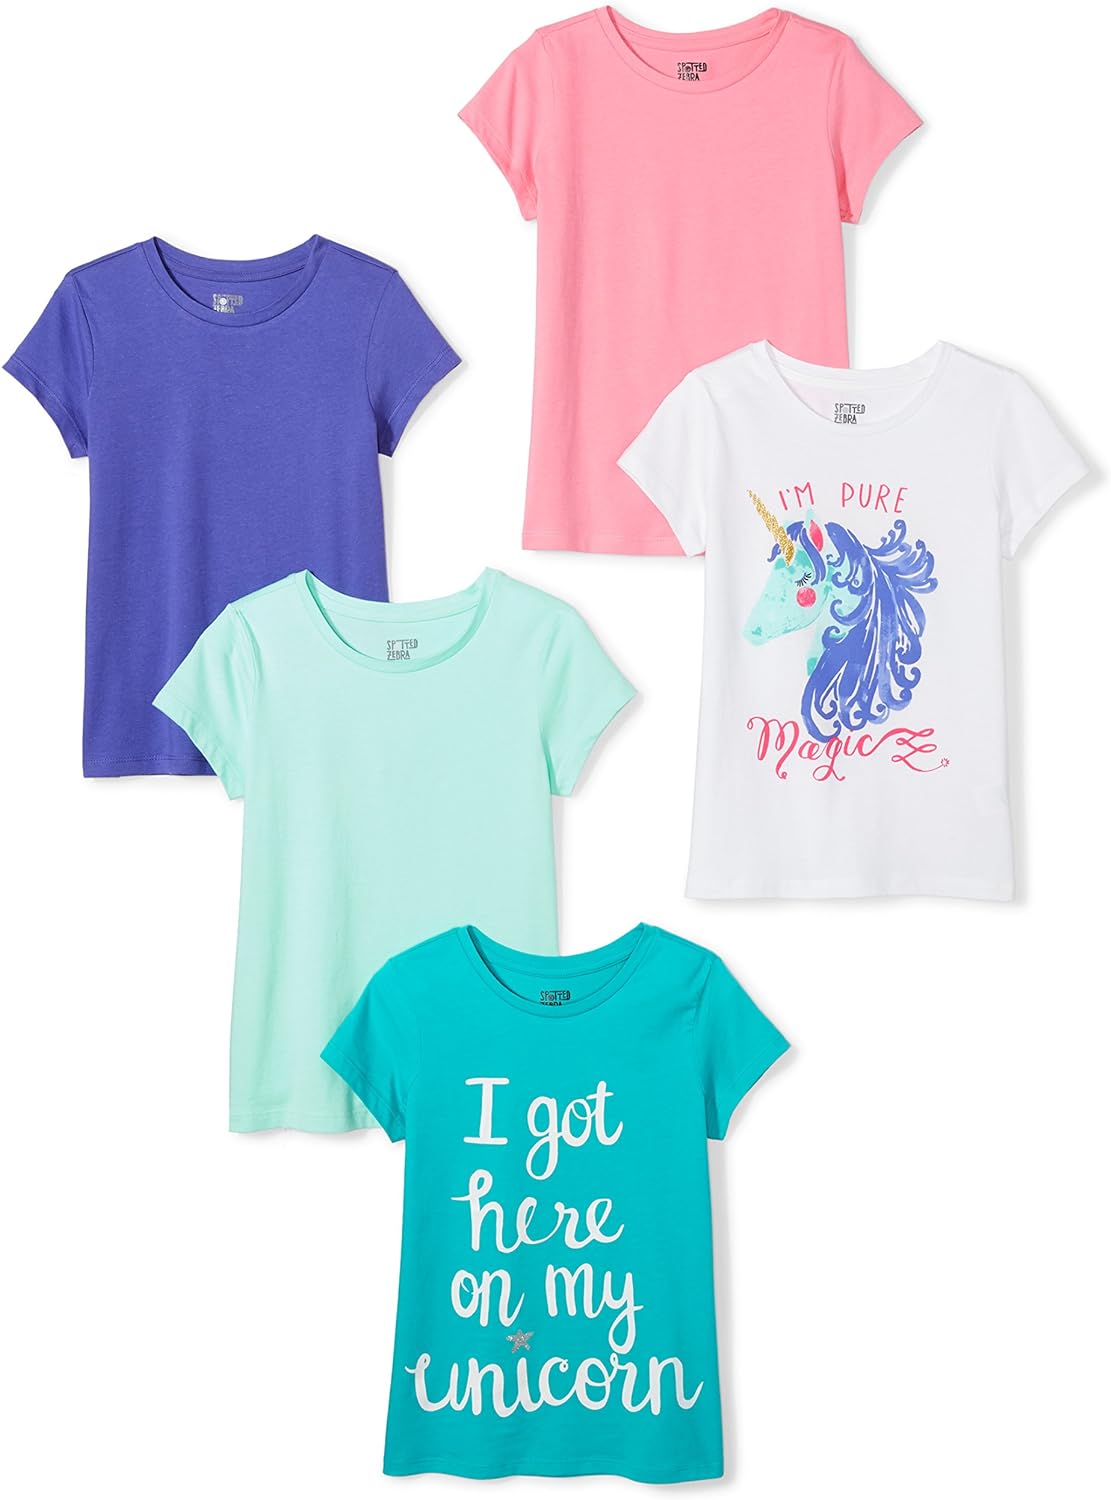 Amazon Essentials Girls and Toddlers' Short-Sleeve T-Shirt Tops (Previously Spotted Zebra), Multipacks - $10.79